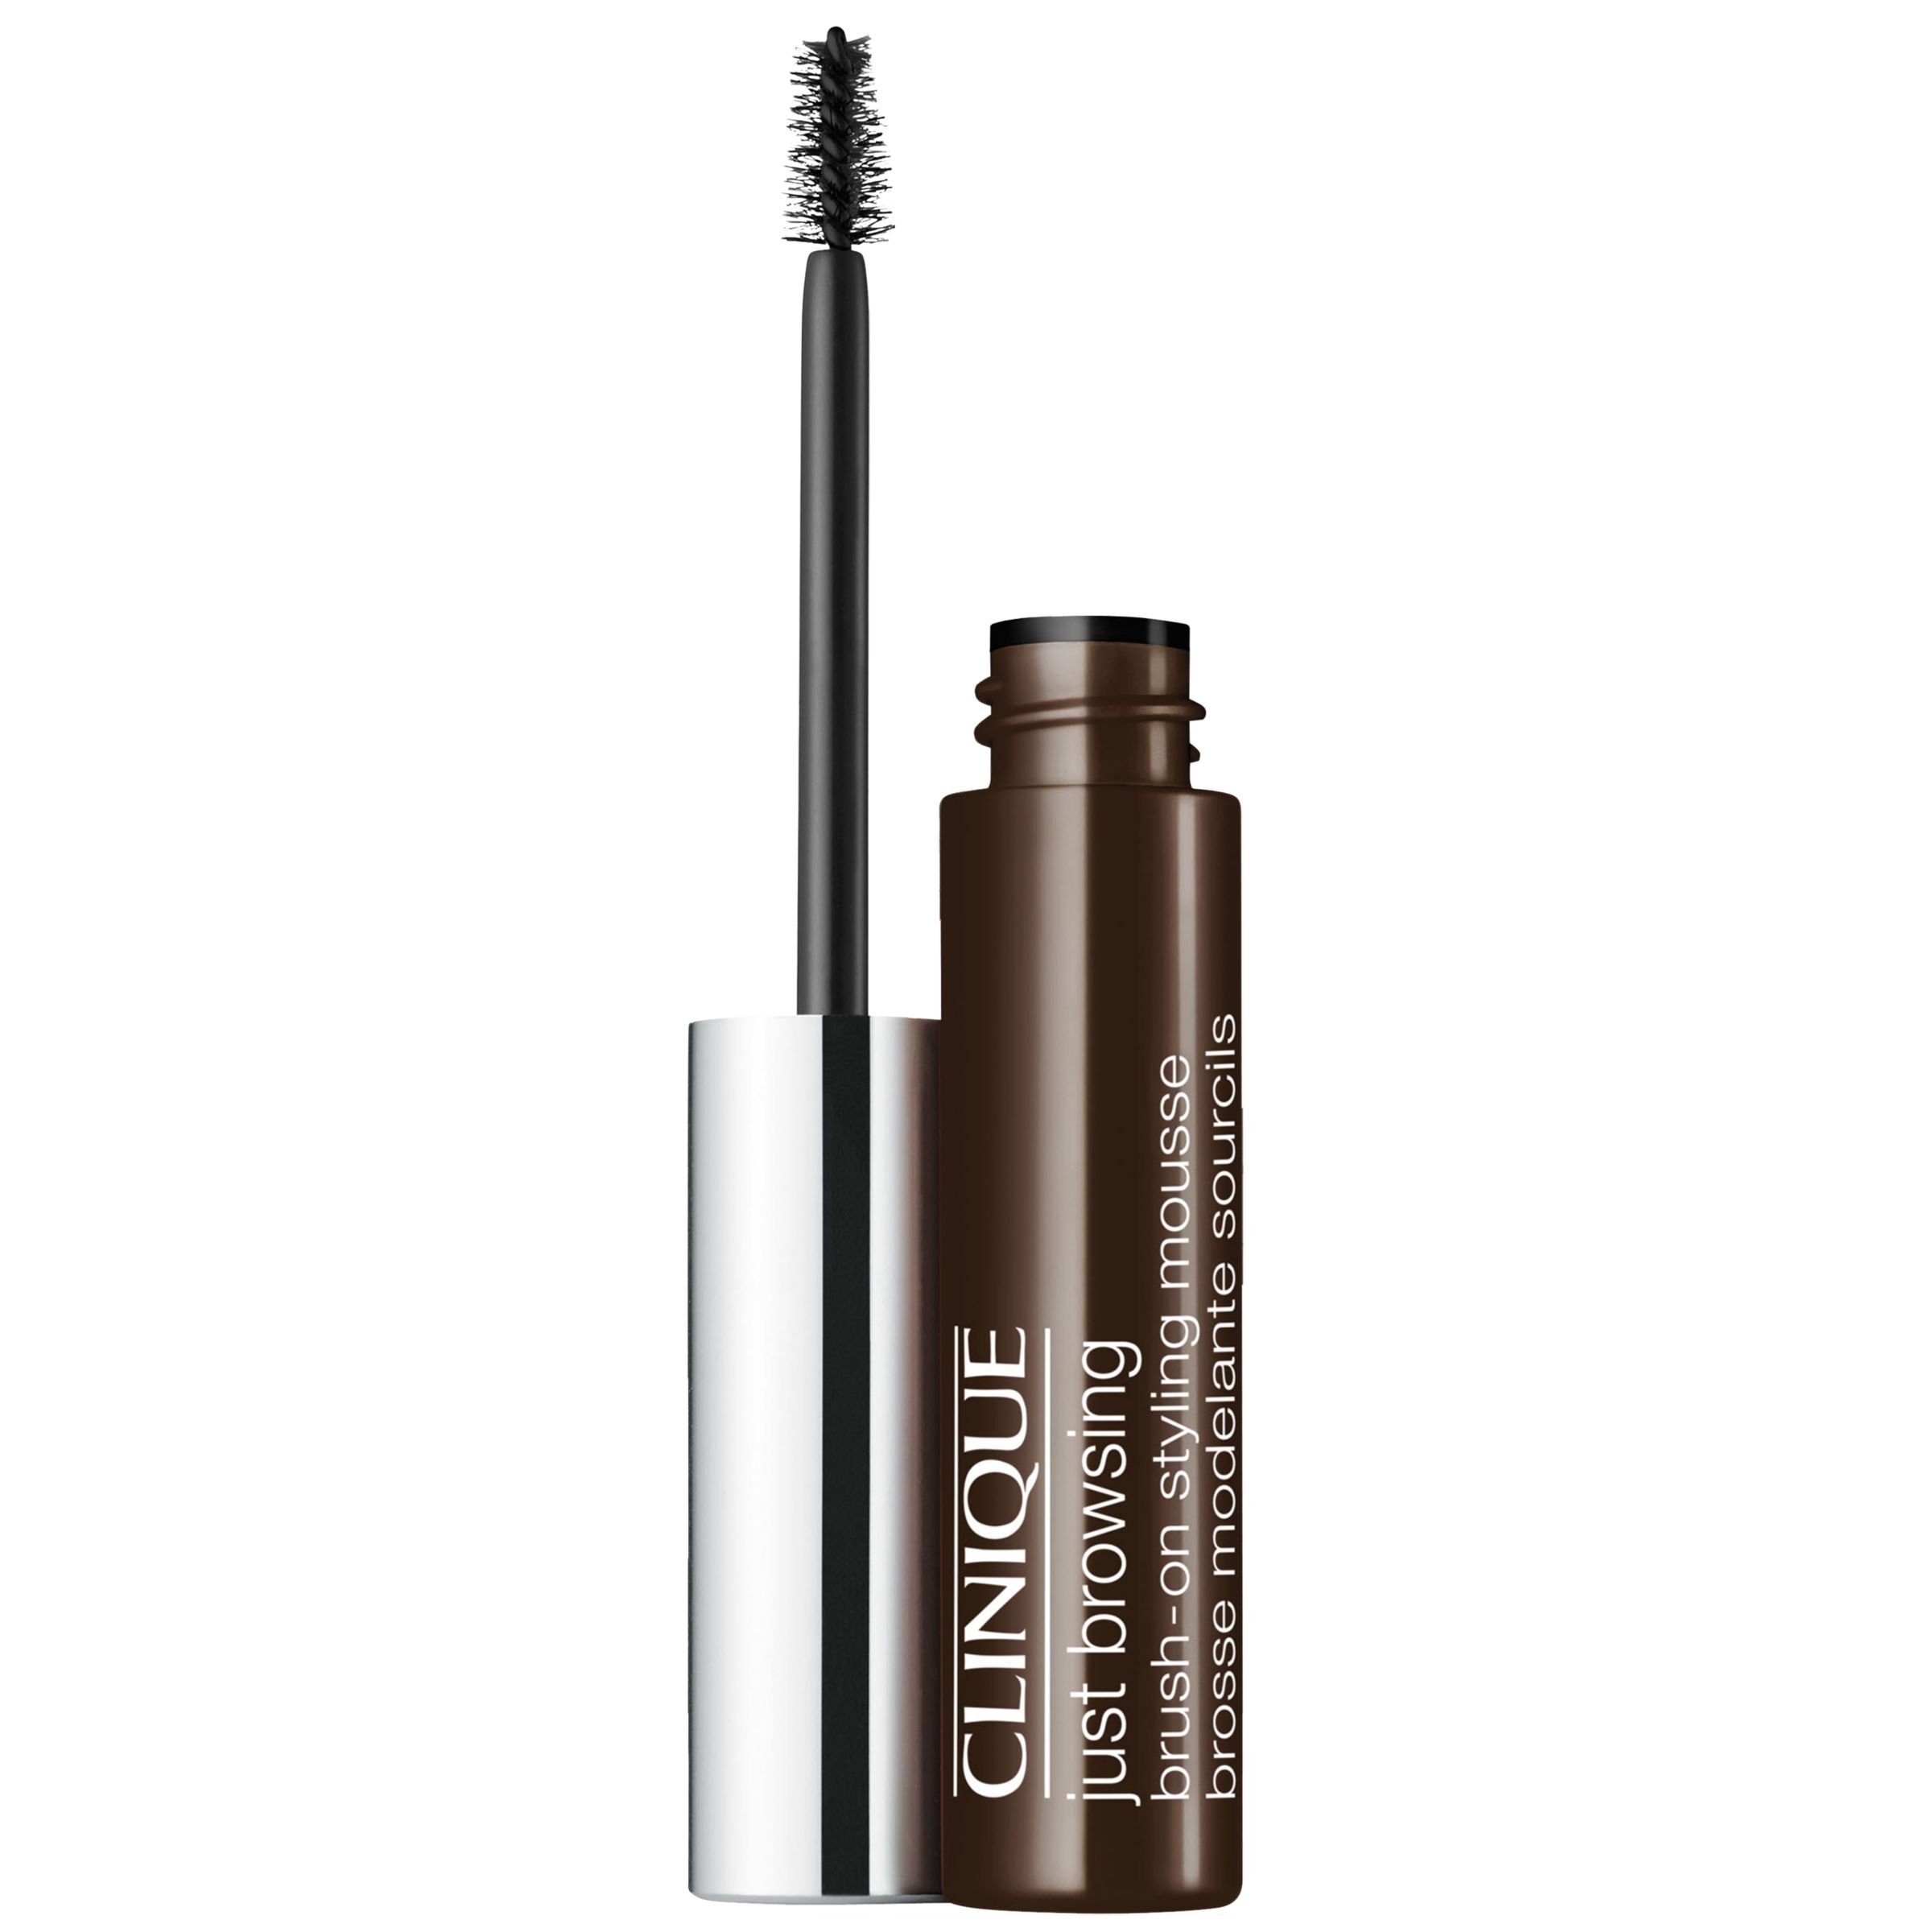 Clinique Just Browsing, Brown/Black 1